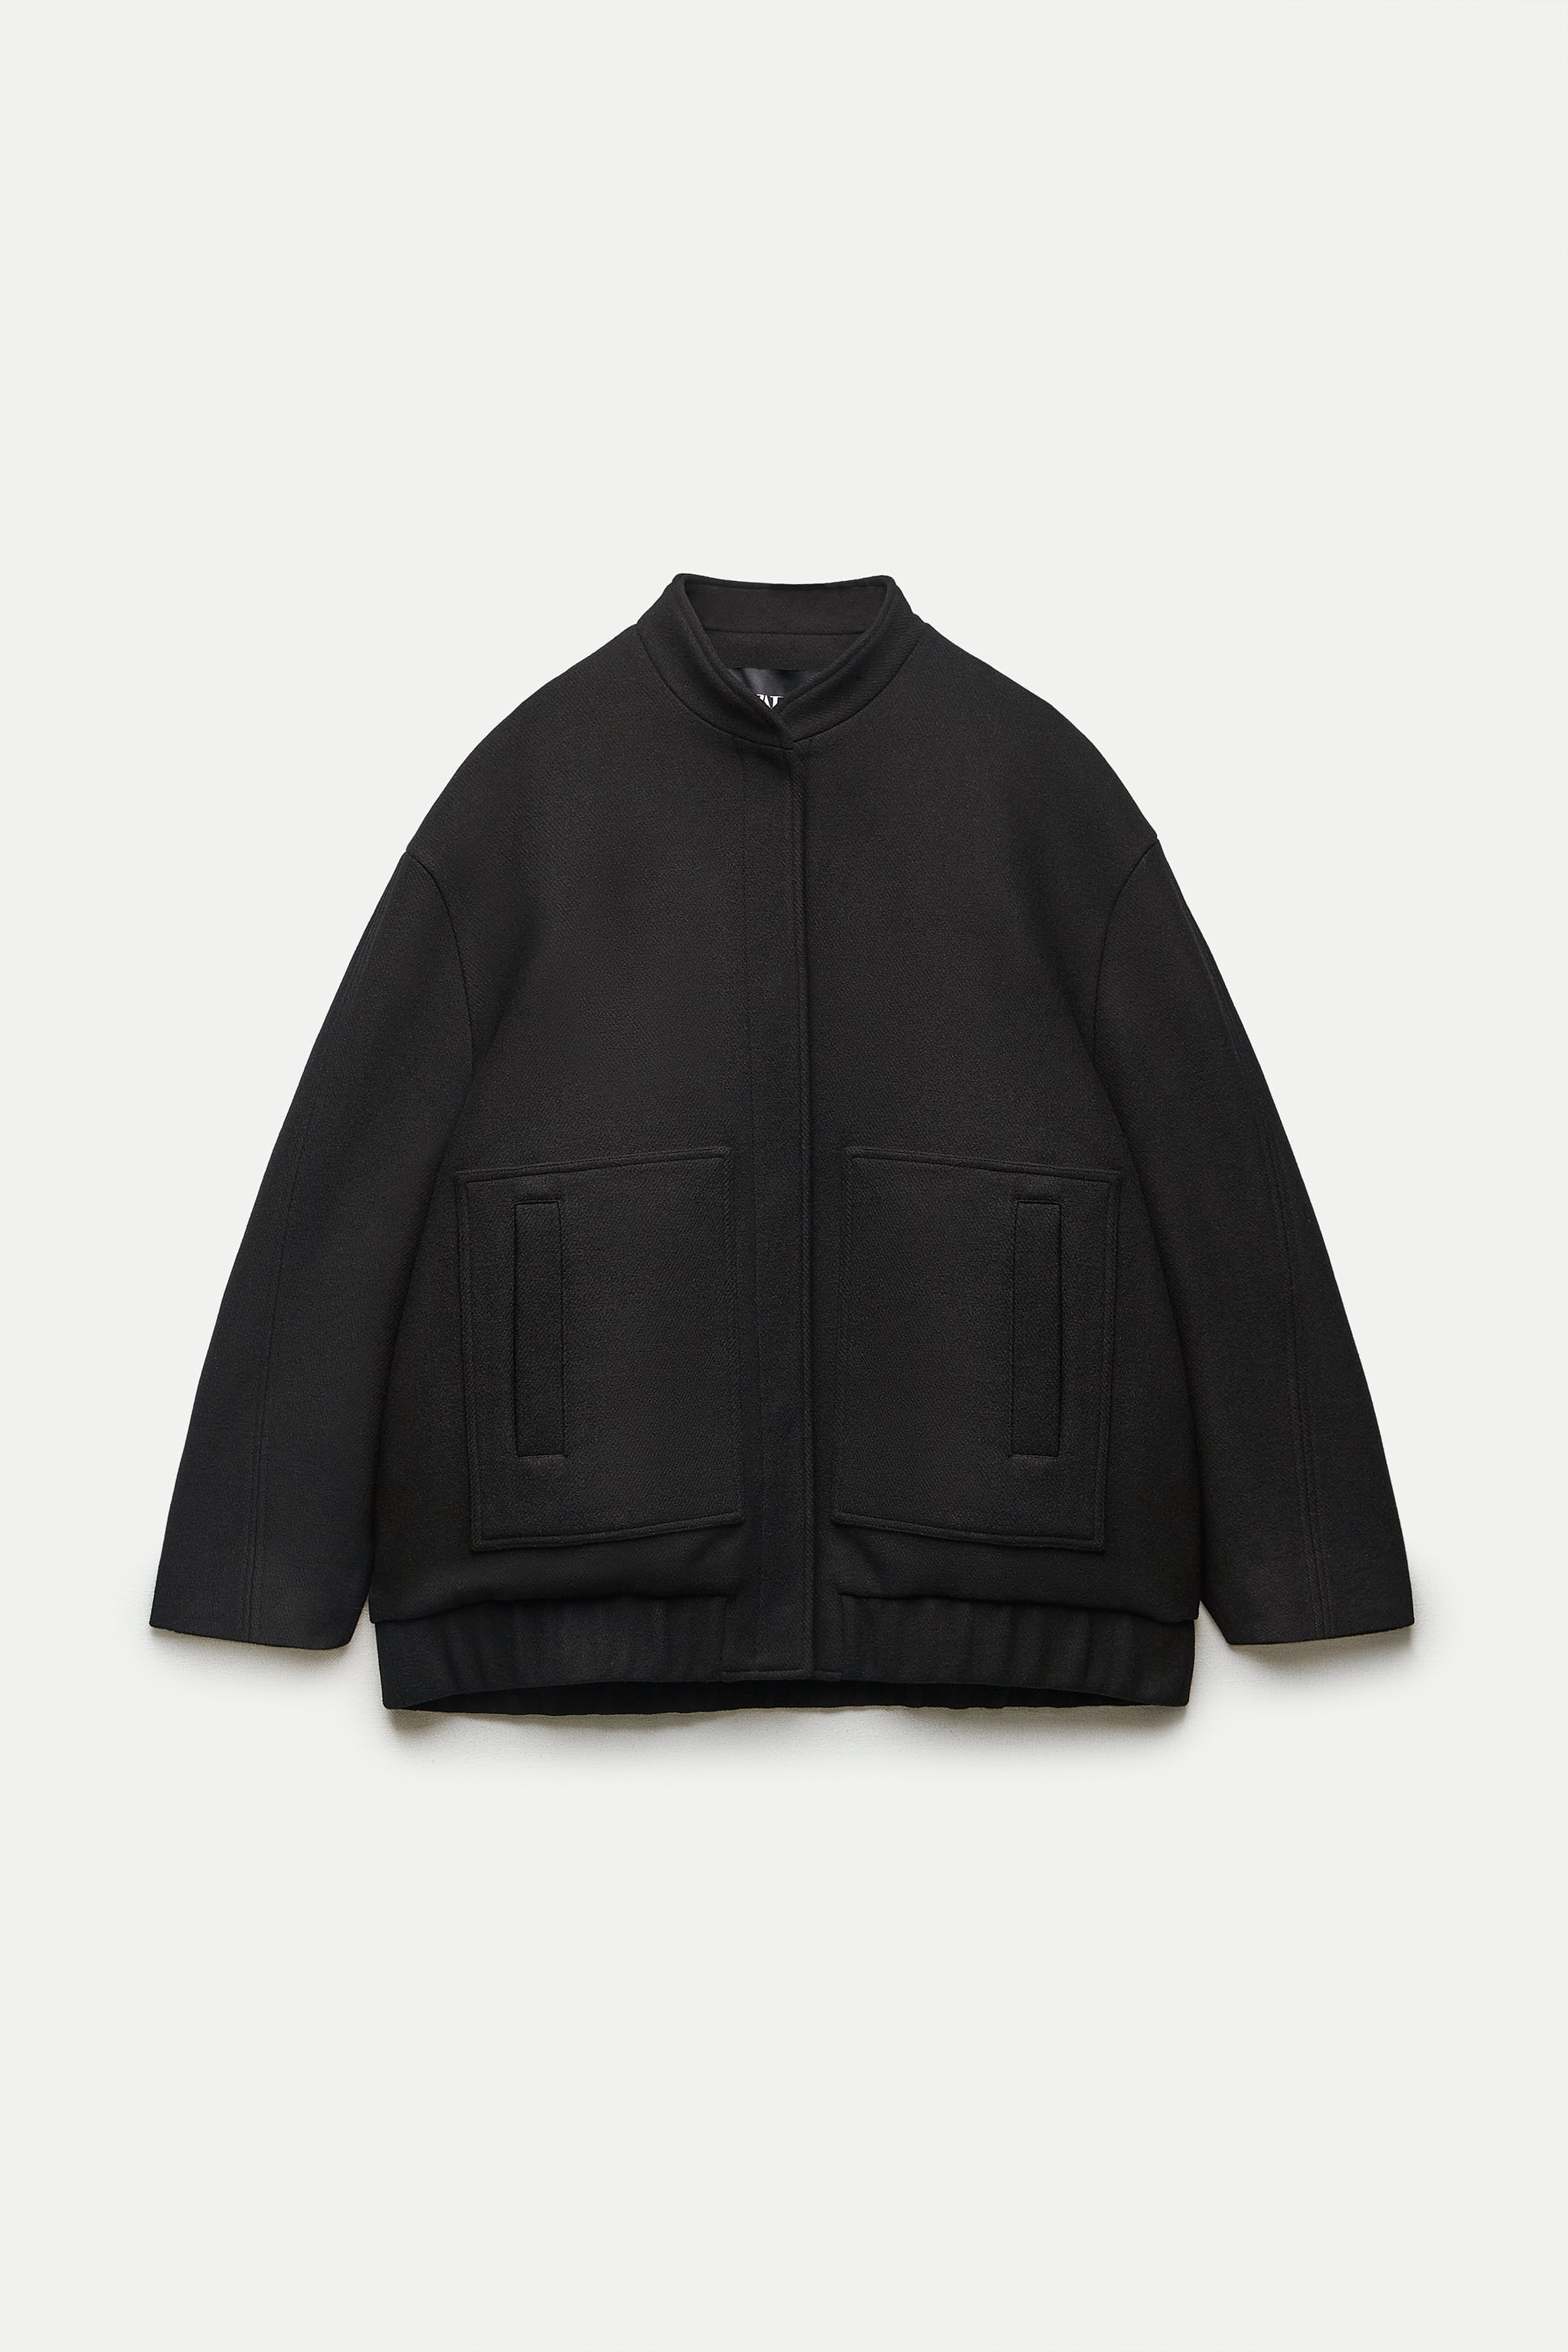 ZW COLLECTION WOOL BOMBER